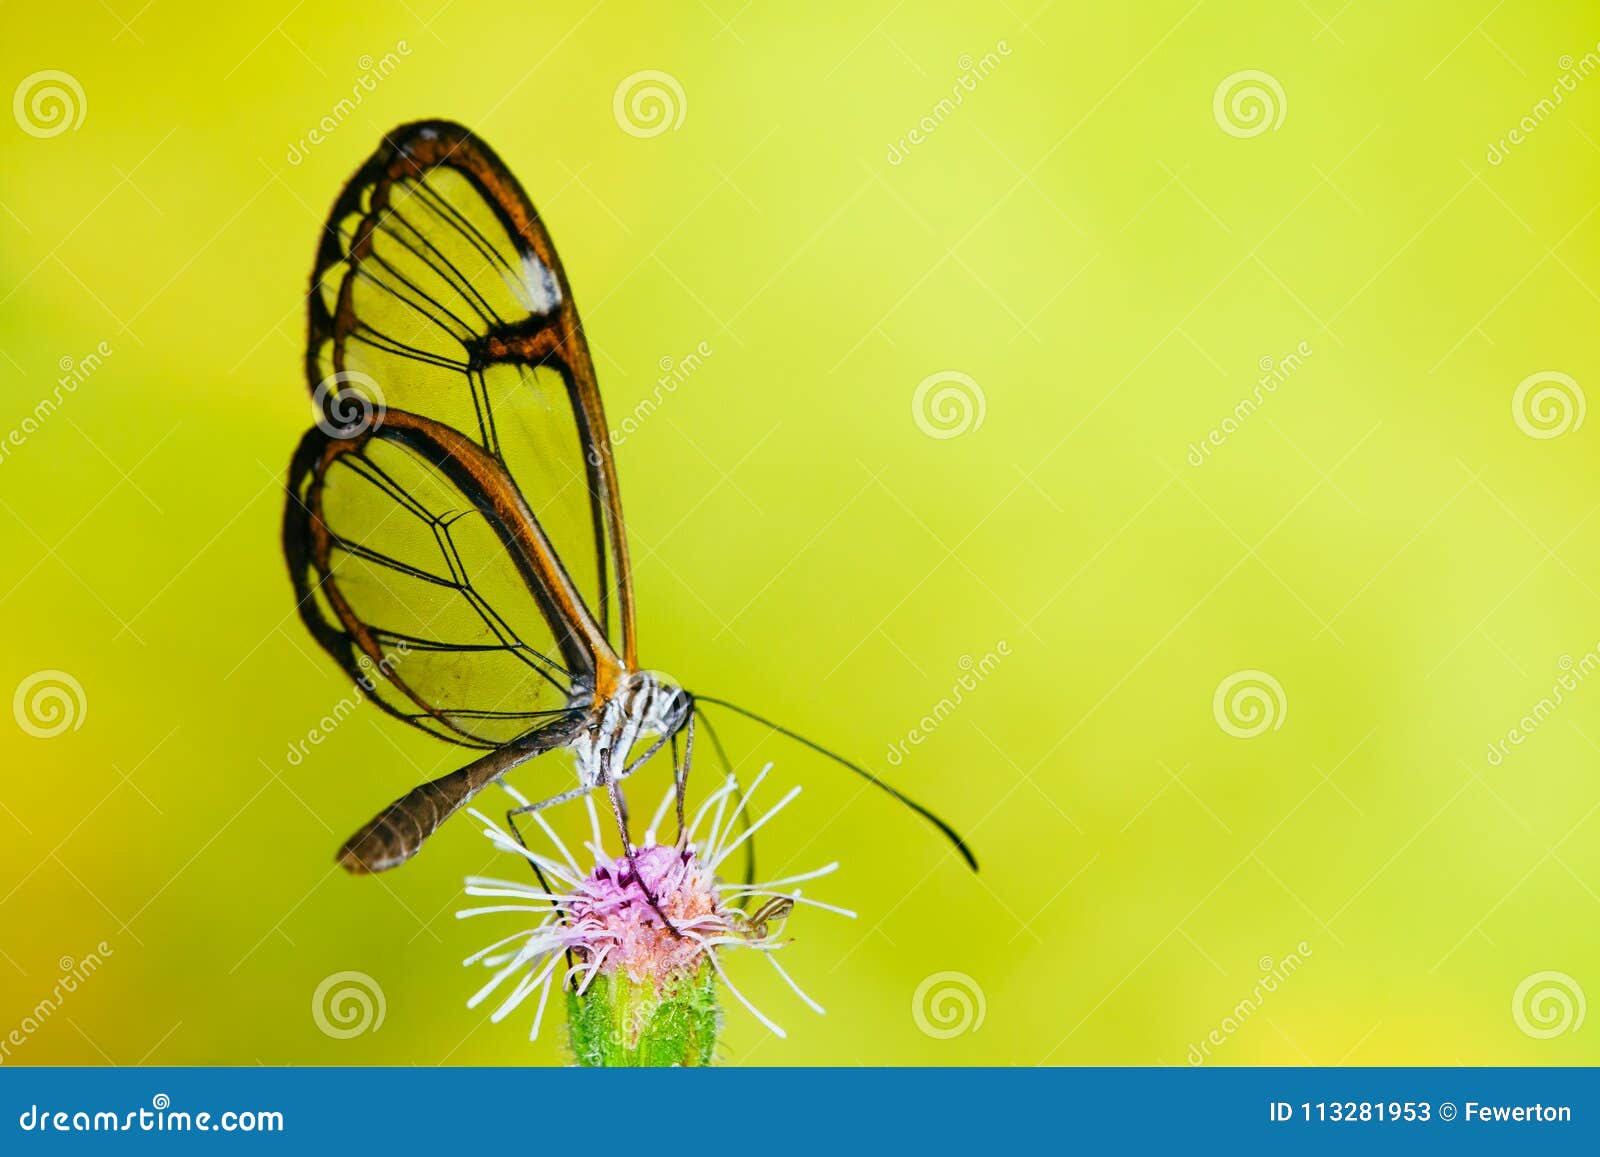 clearwing butterfly with transparent `glass` wings greta oto closeup sitting and drinking nectar from a purple flower